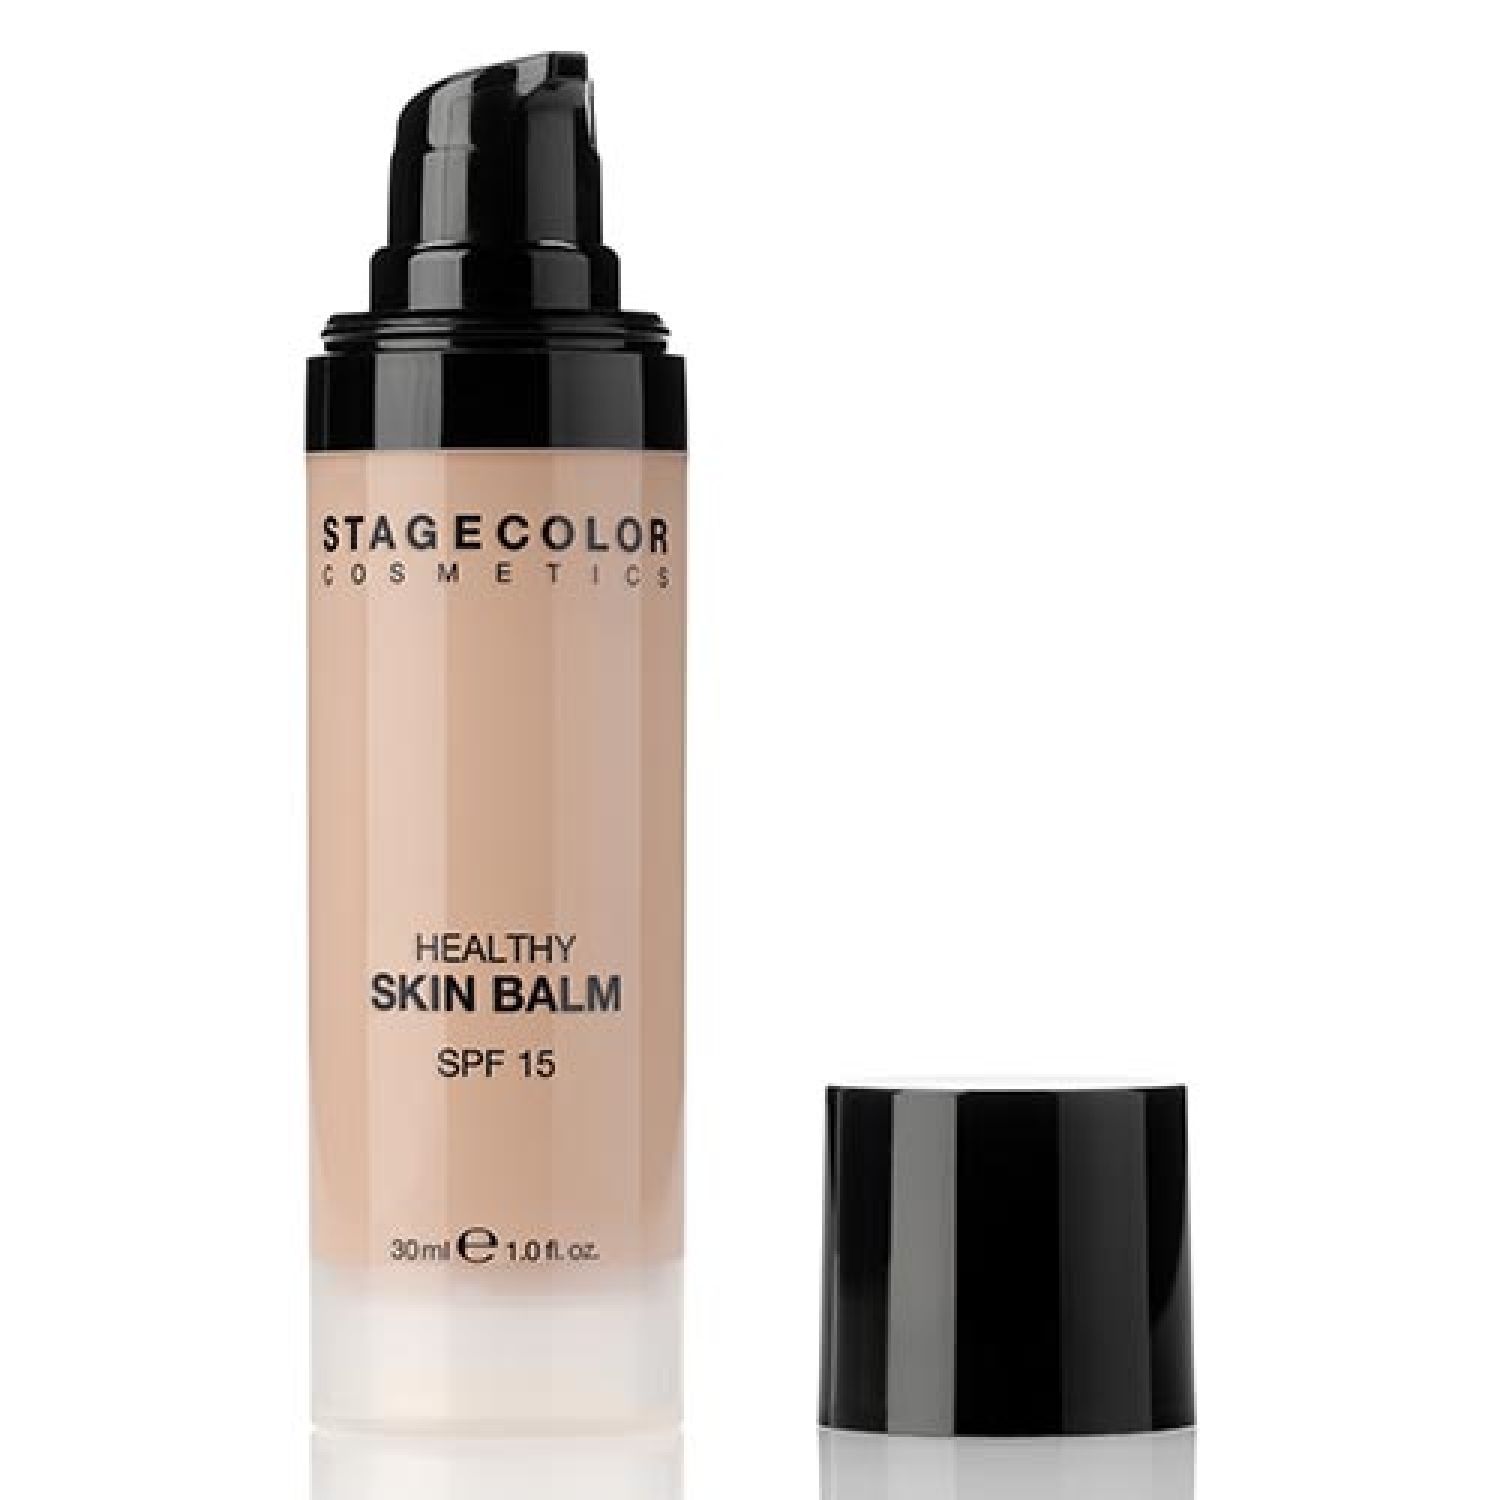 STAGECOLOR cosmetics Make up Healthy Skin Balm 795 - Natural Beige 30 ml